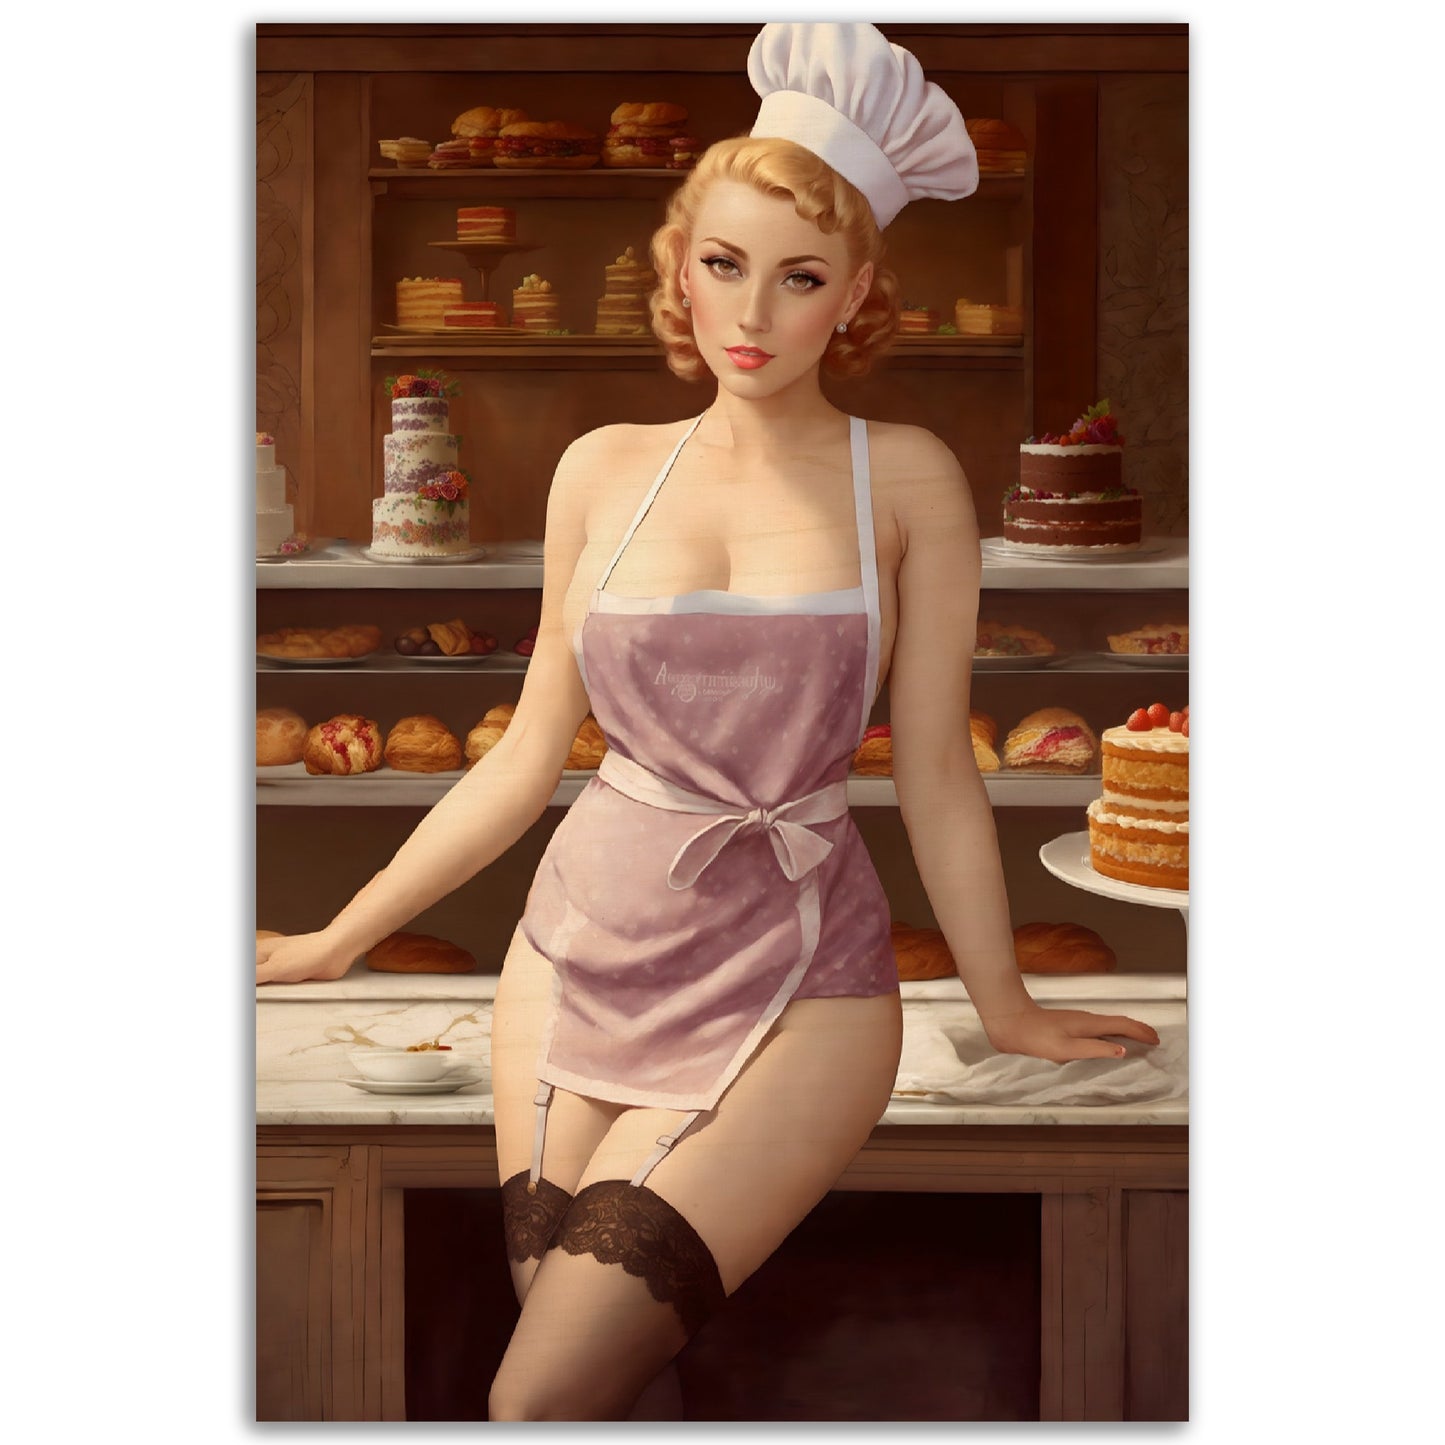 Daily Pinup #40 - Pastry Chef Wall Art